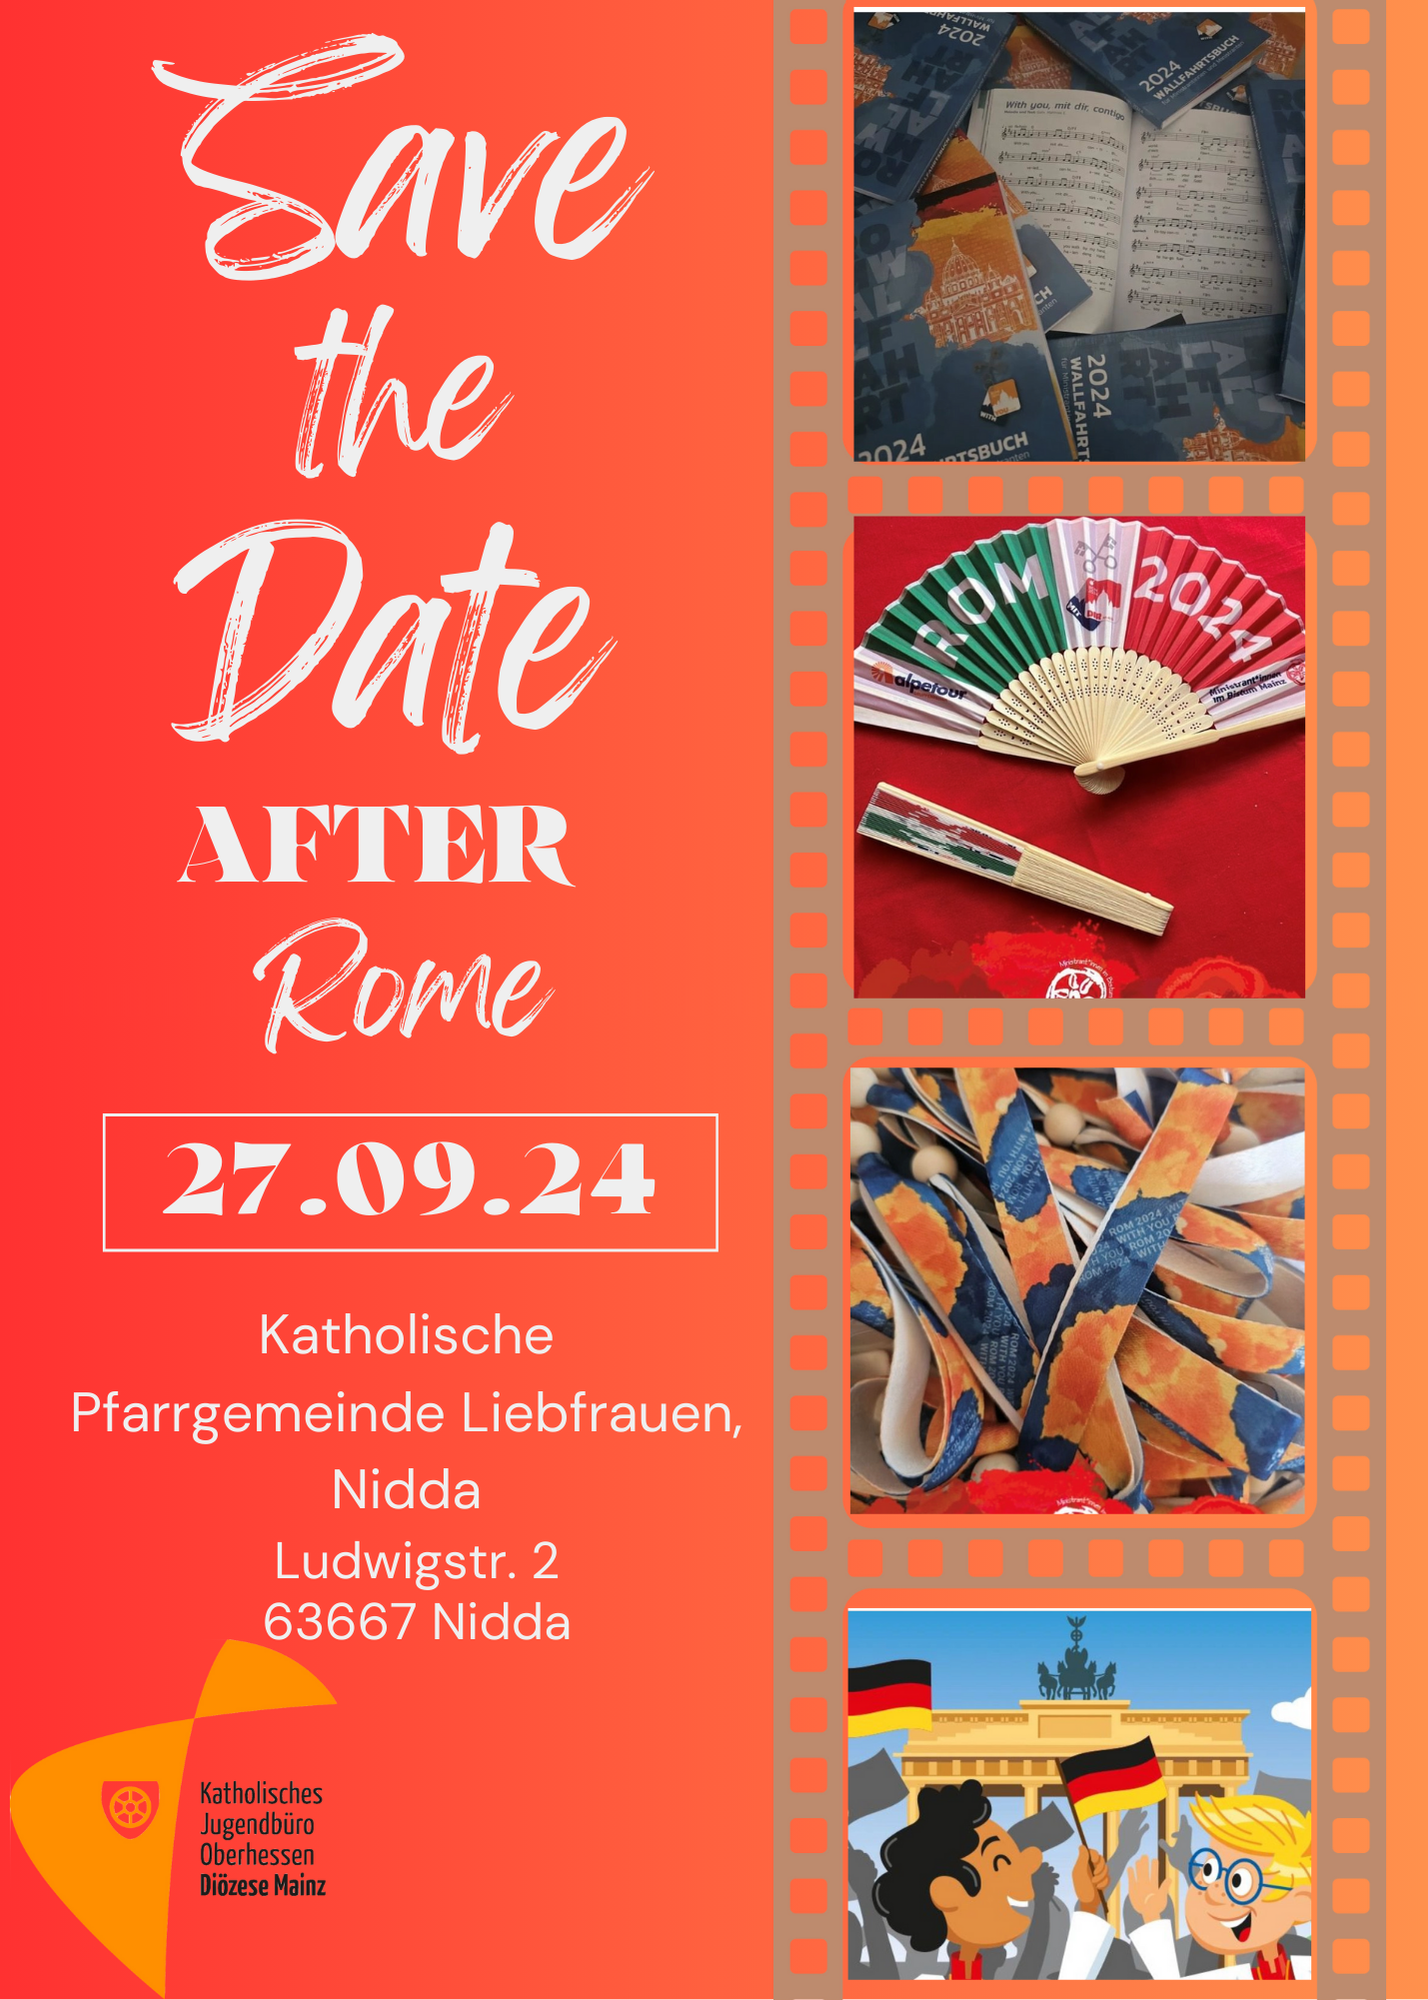 Save the Date After Rome